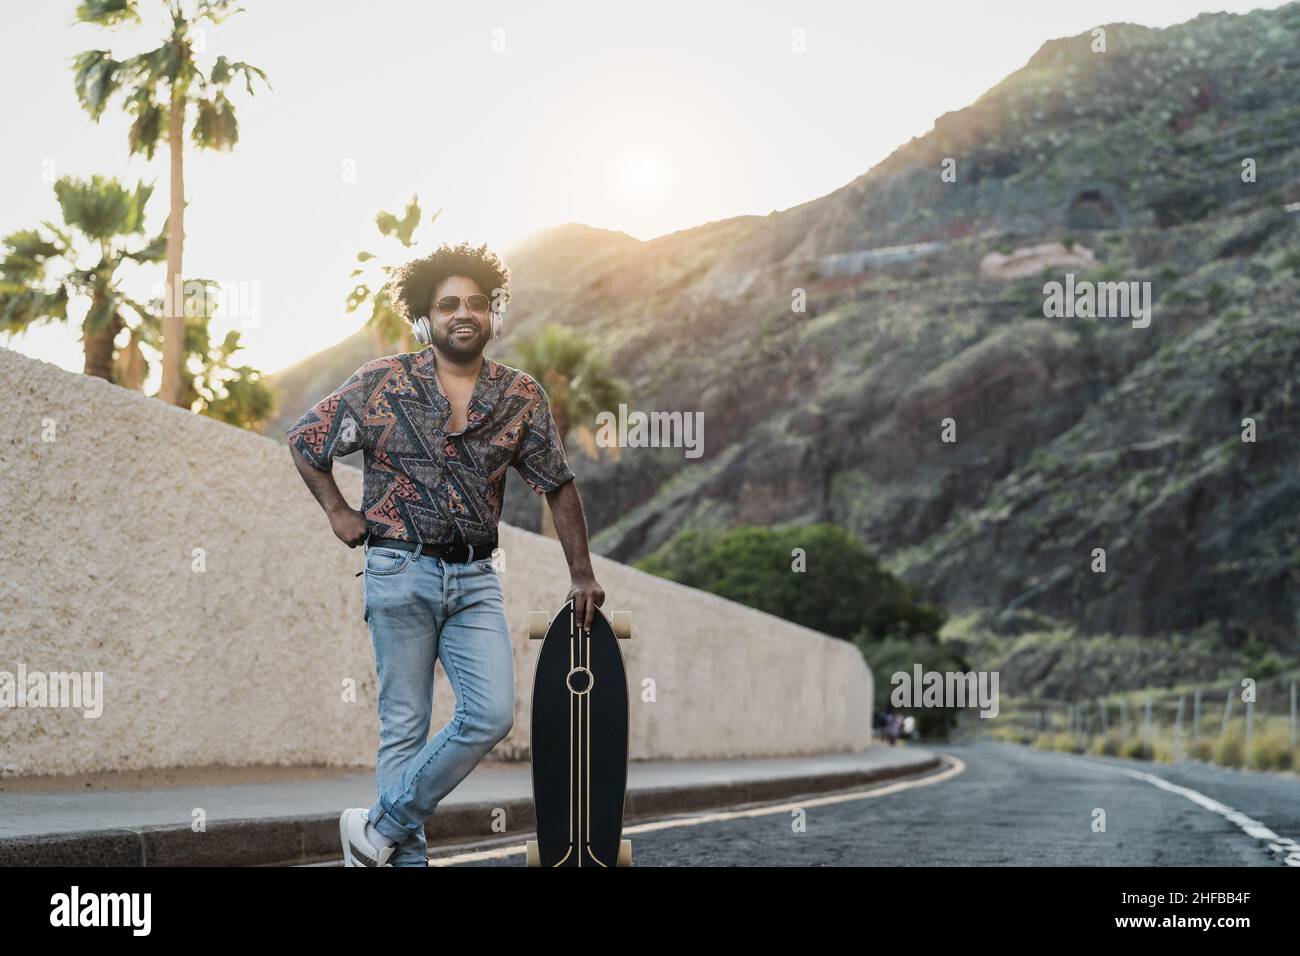 Happy Latin man having fun listening to music and riding on skate during summer time - Youth people lifestyle concept Stock Photo